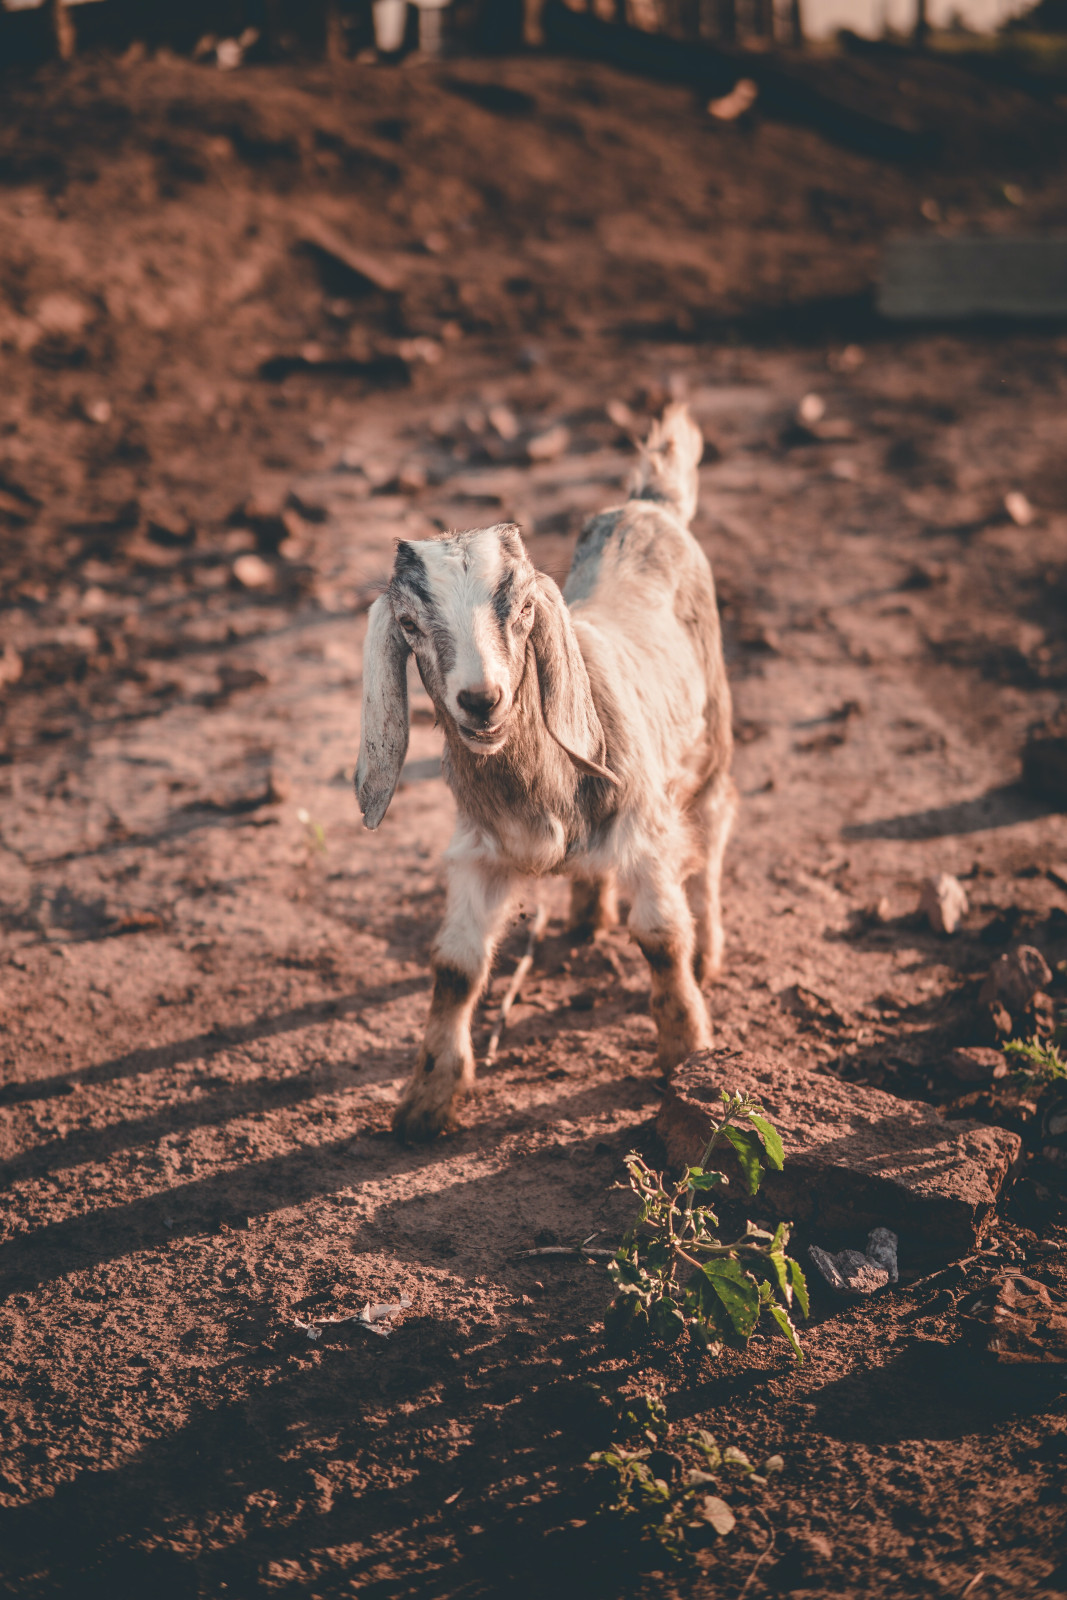 Welcome to the Blissful World of Goats